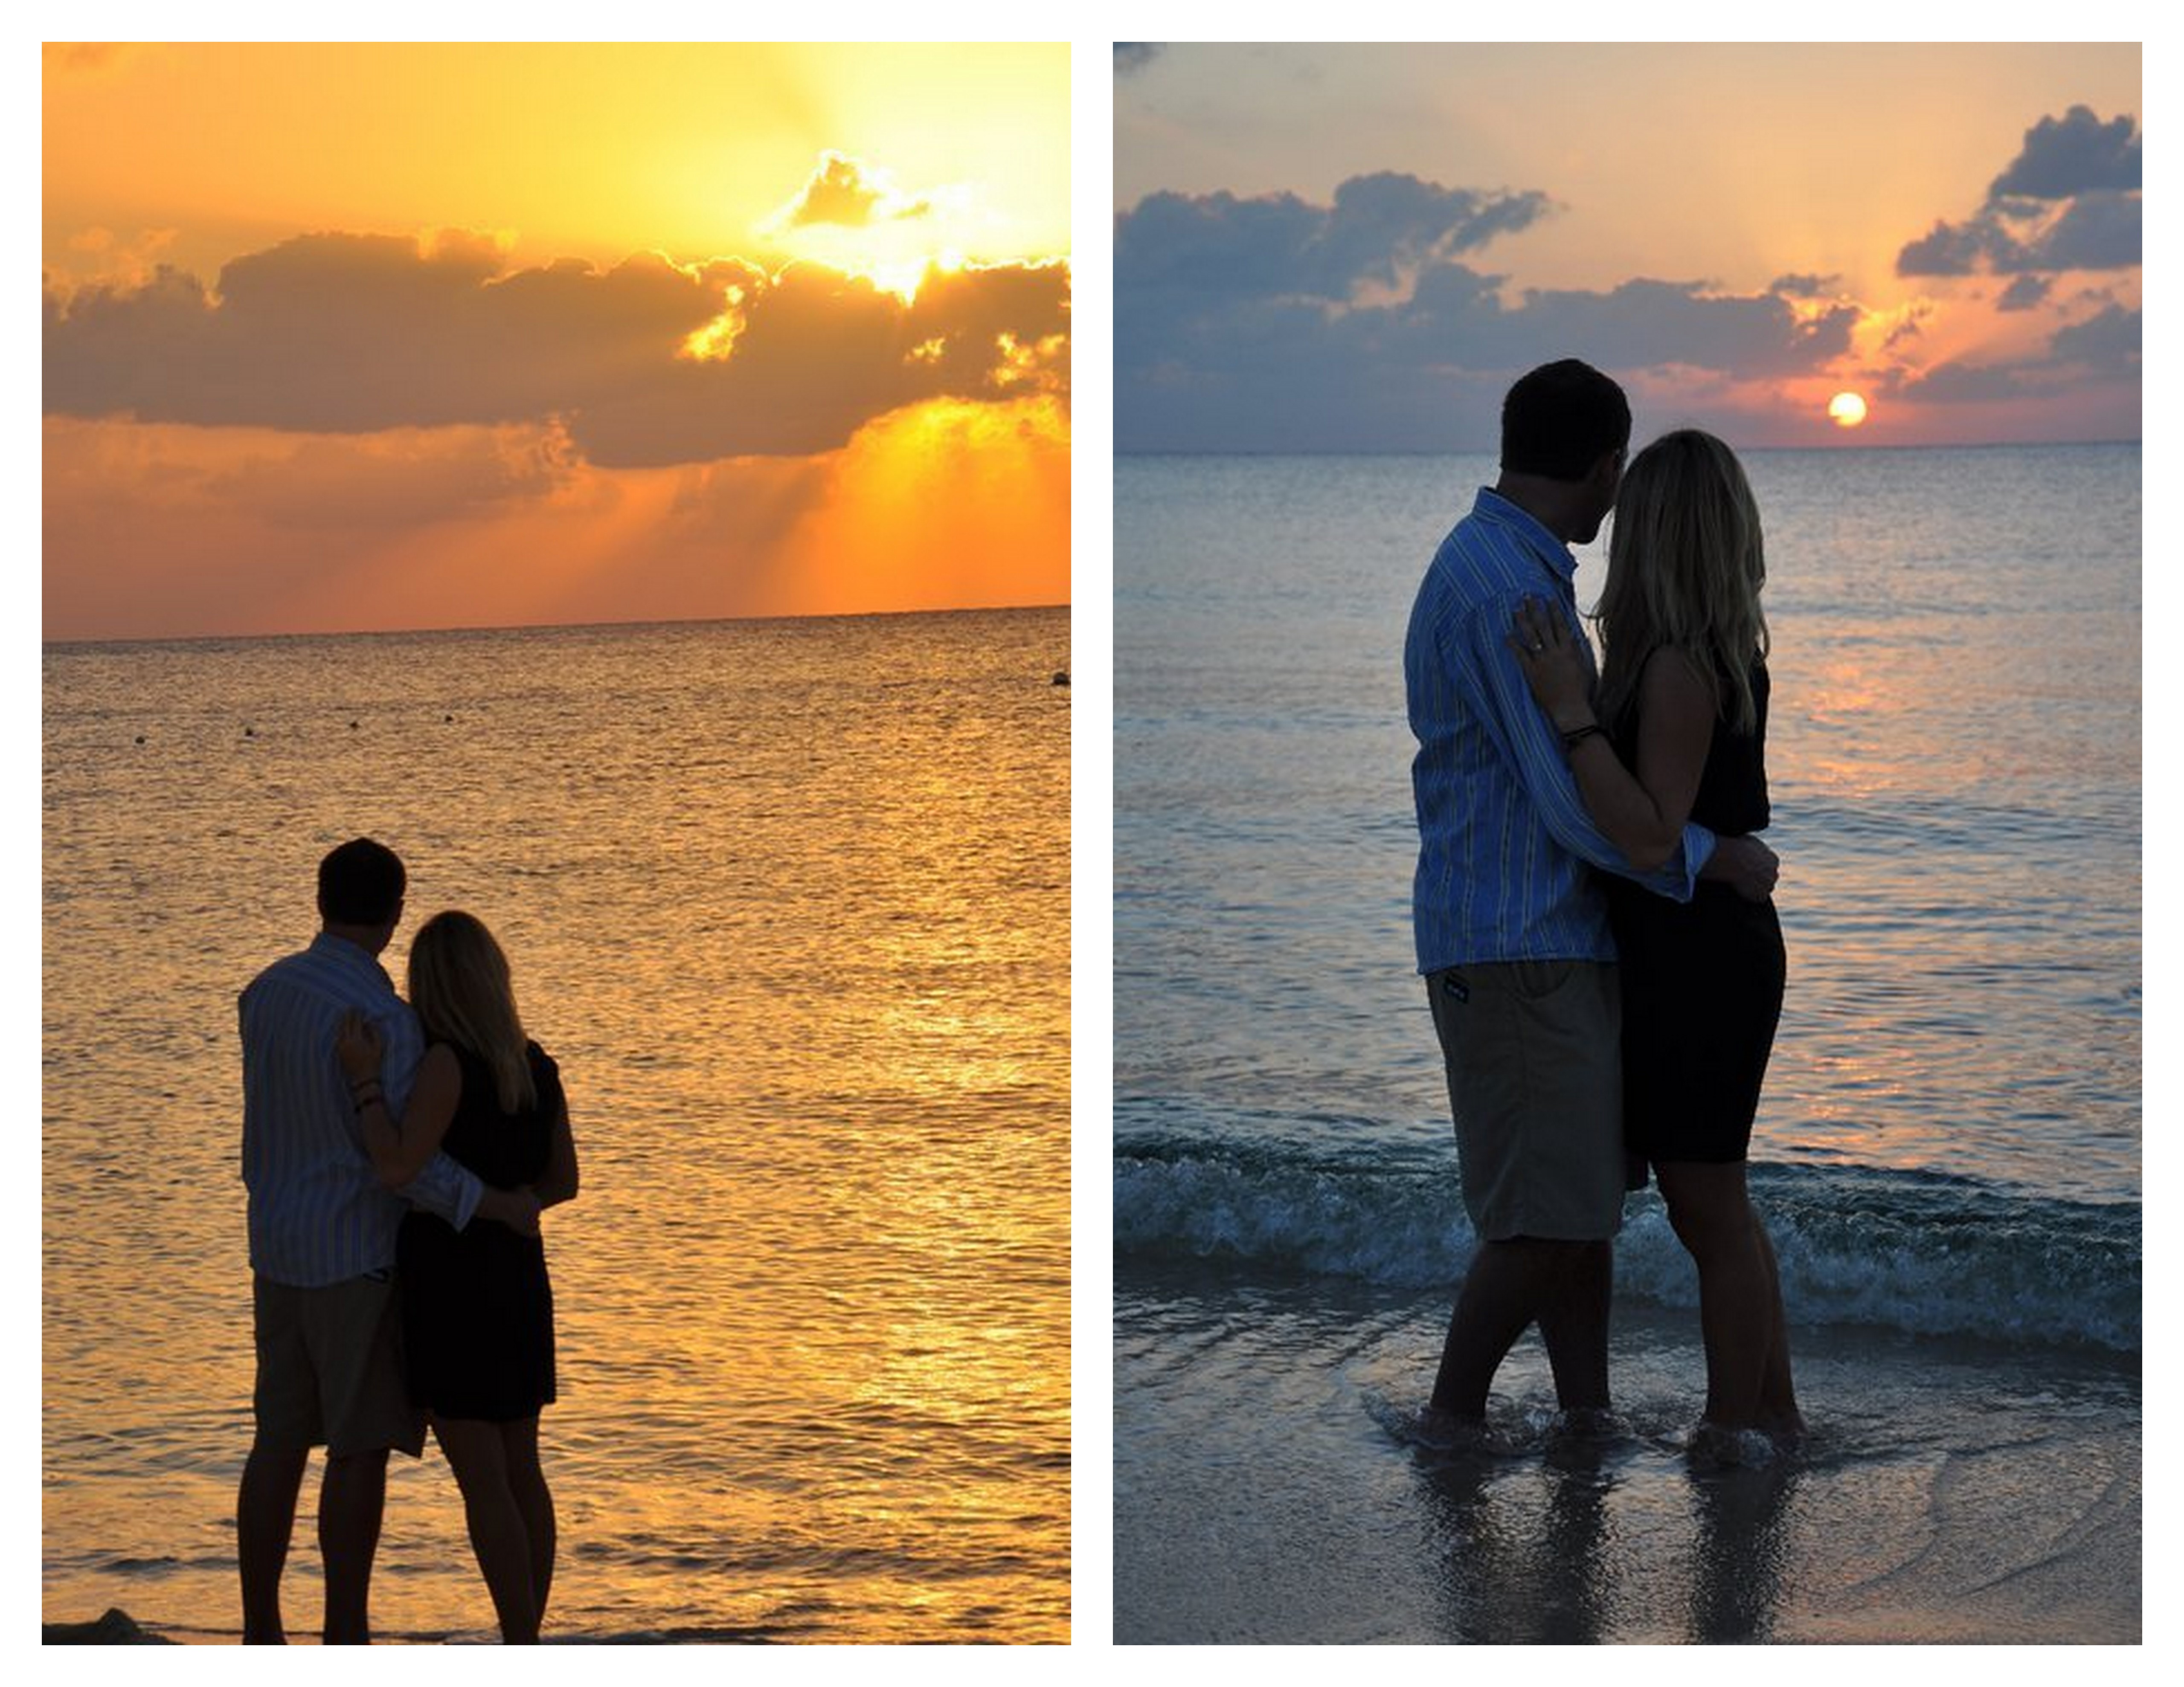 We watched the sunset for a solid 15 minutes. It was incredible! So thankful we had such great photographers!